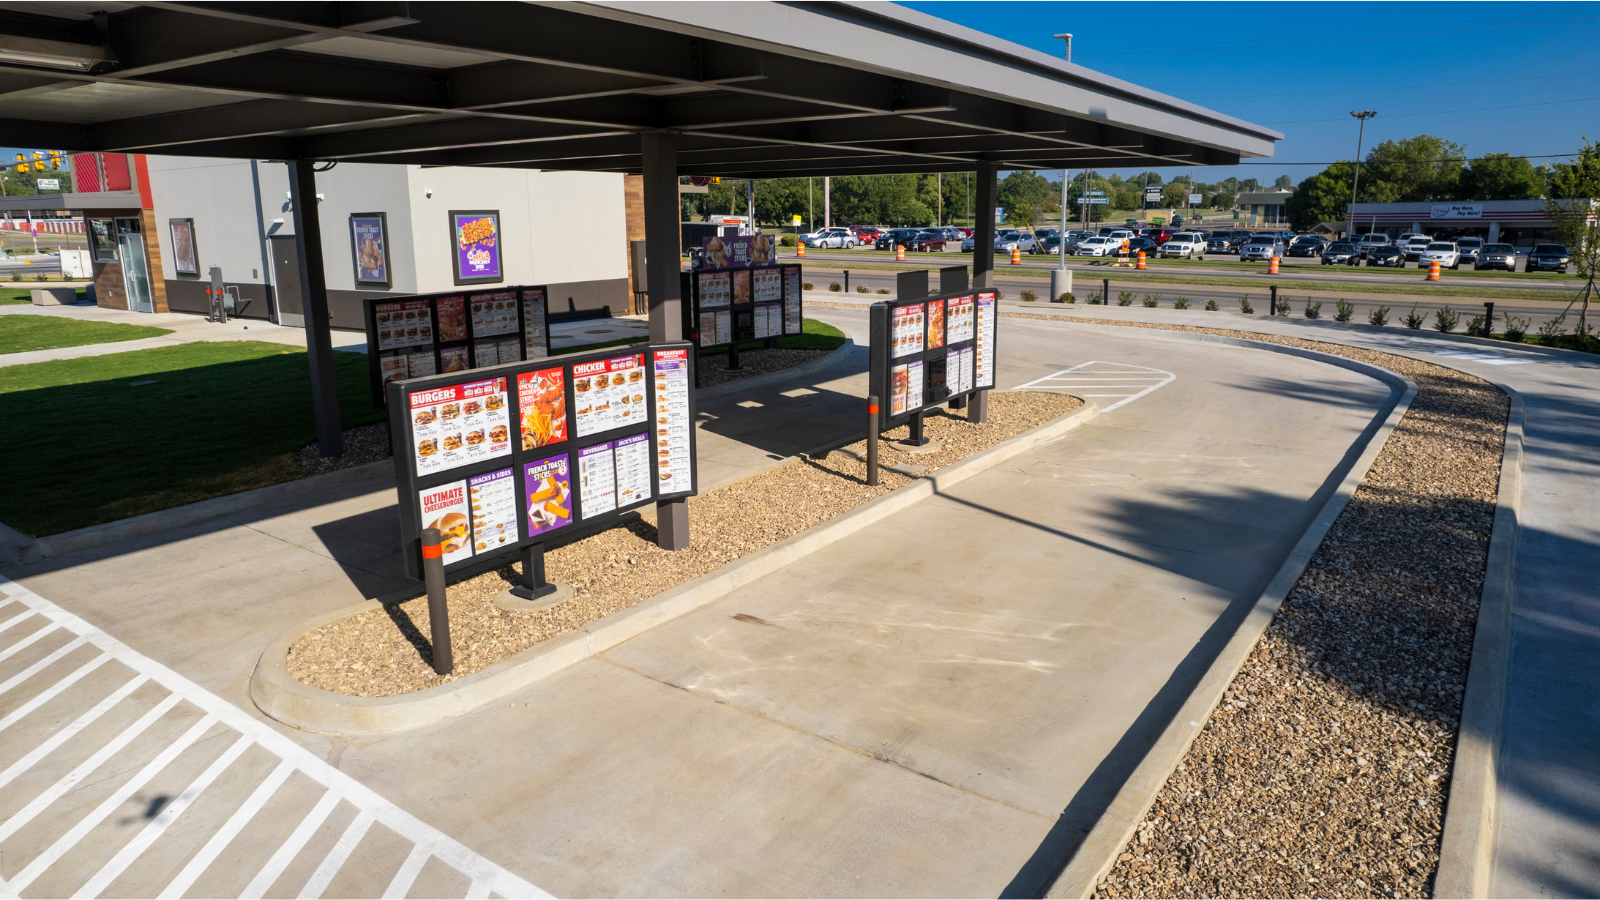 Best Drive-Thru Franchises to Own